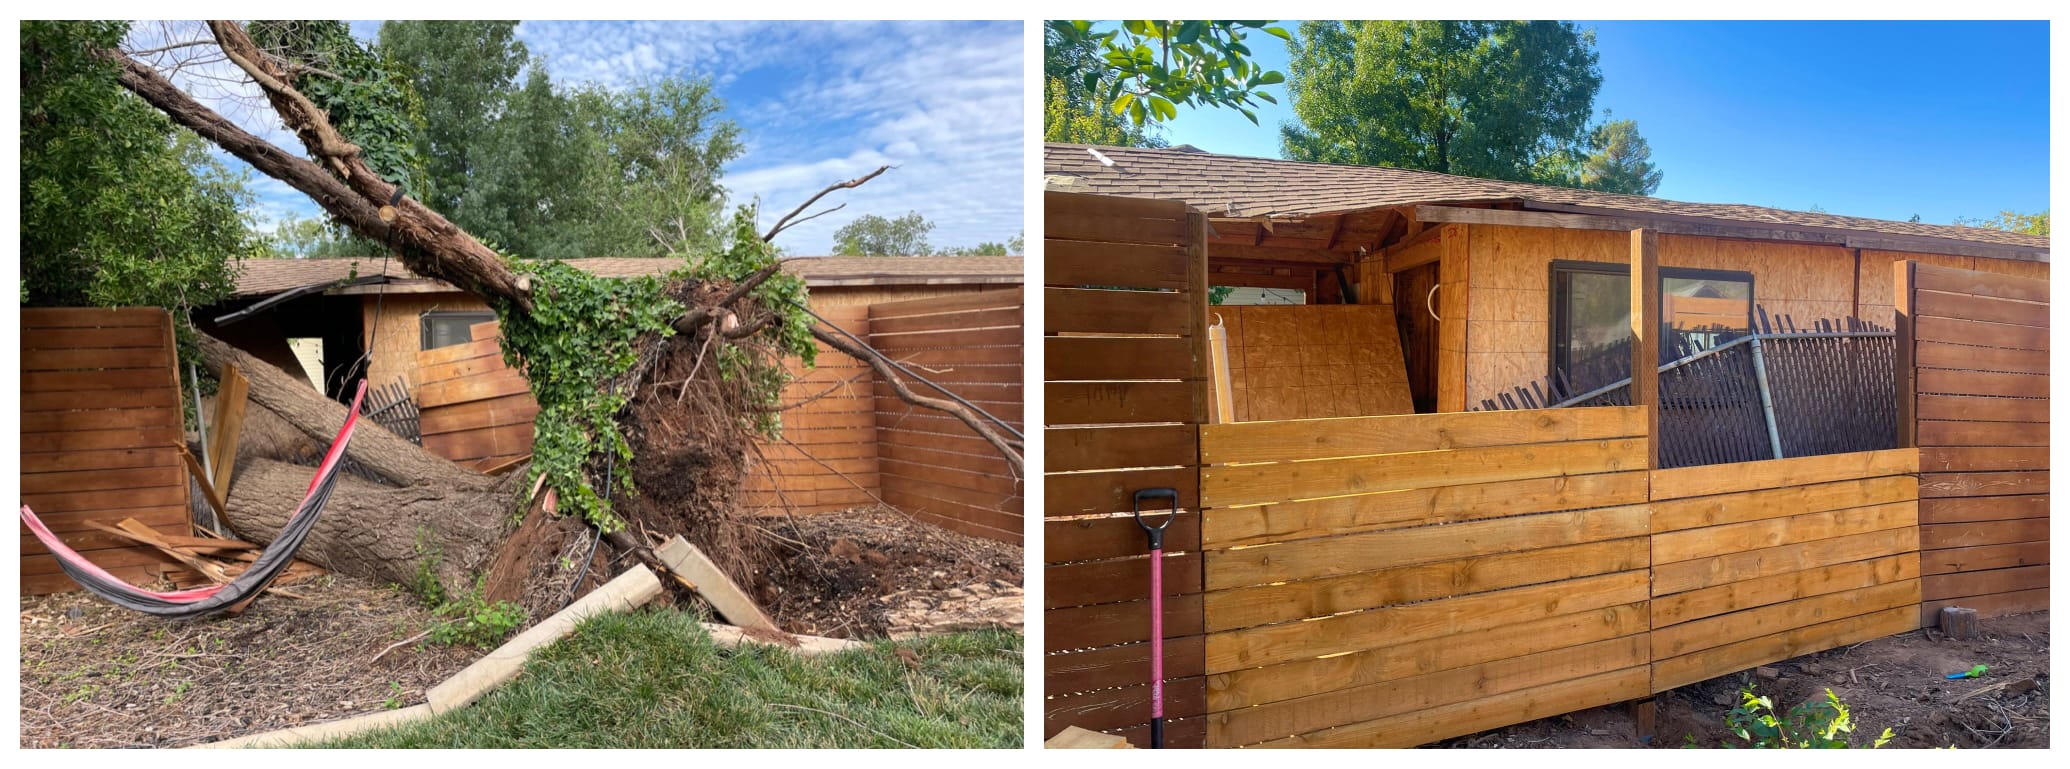 Before and after photograph showing a fence knocked over by a downed tree and then half repaird with a new post and fence siding.